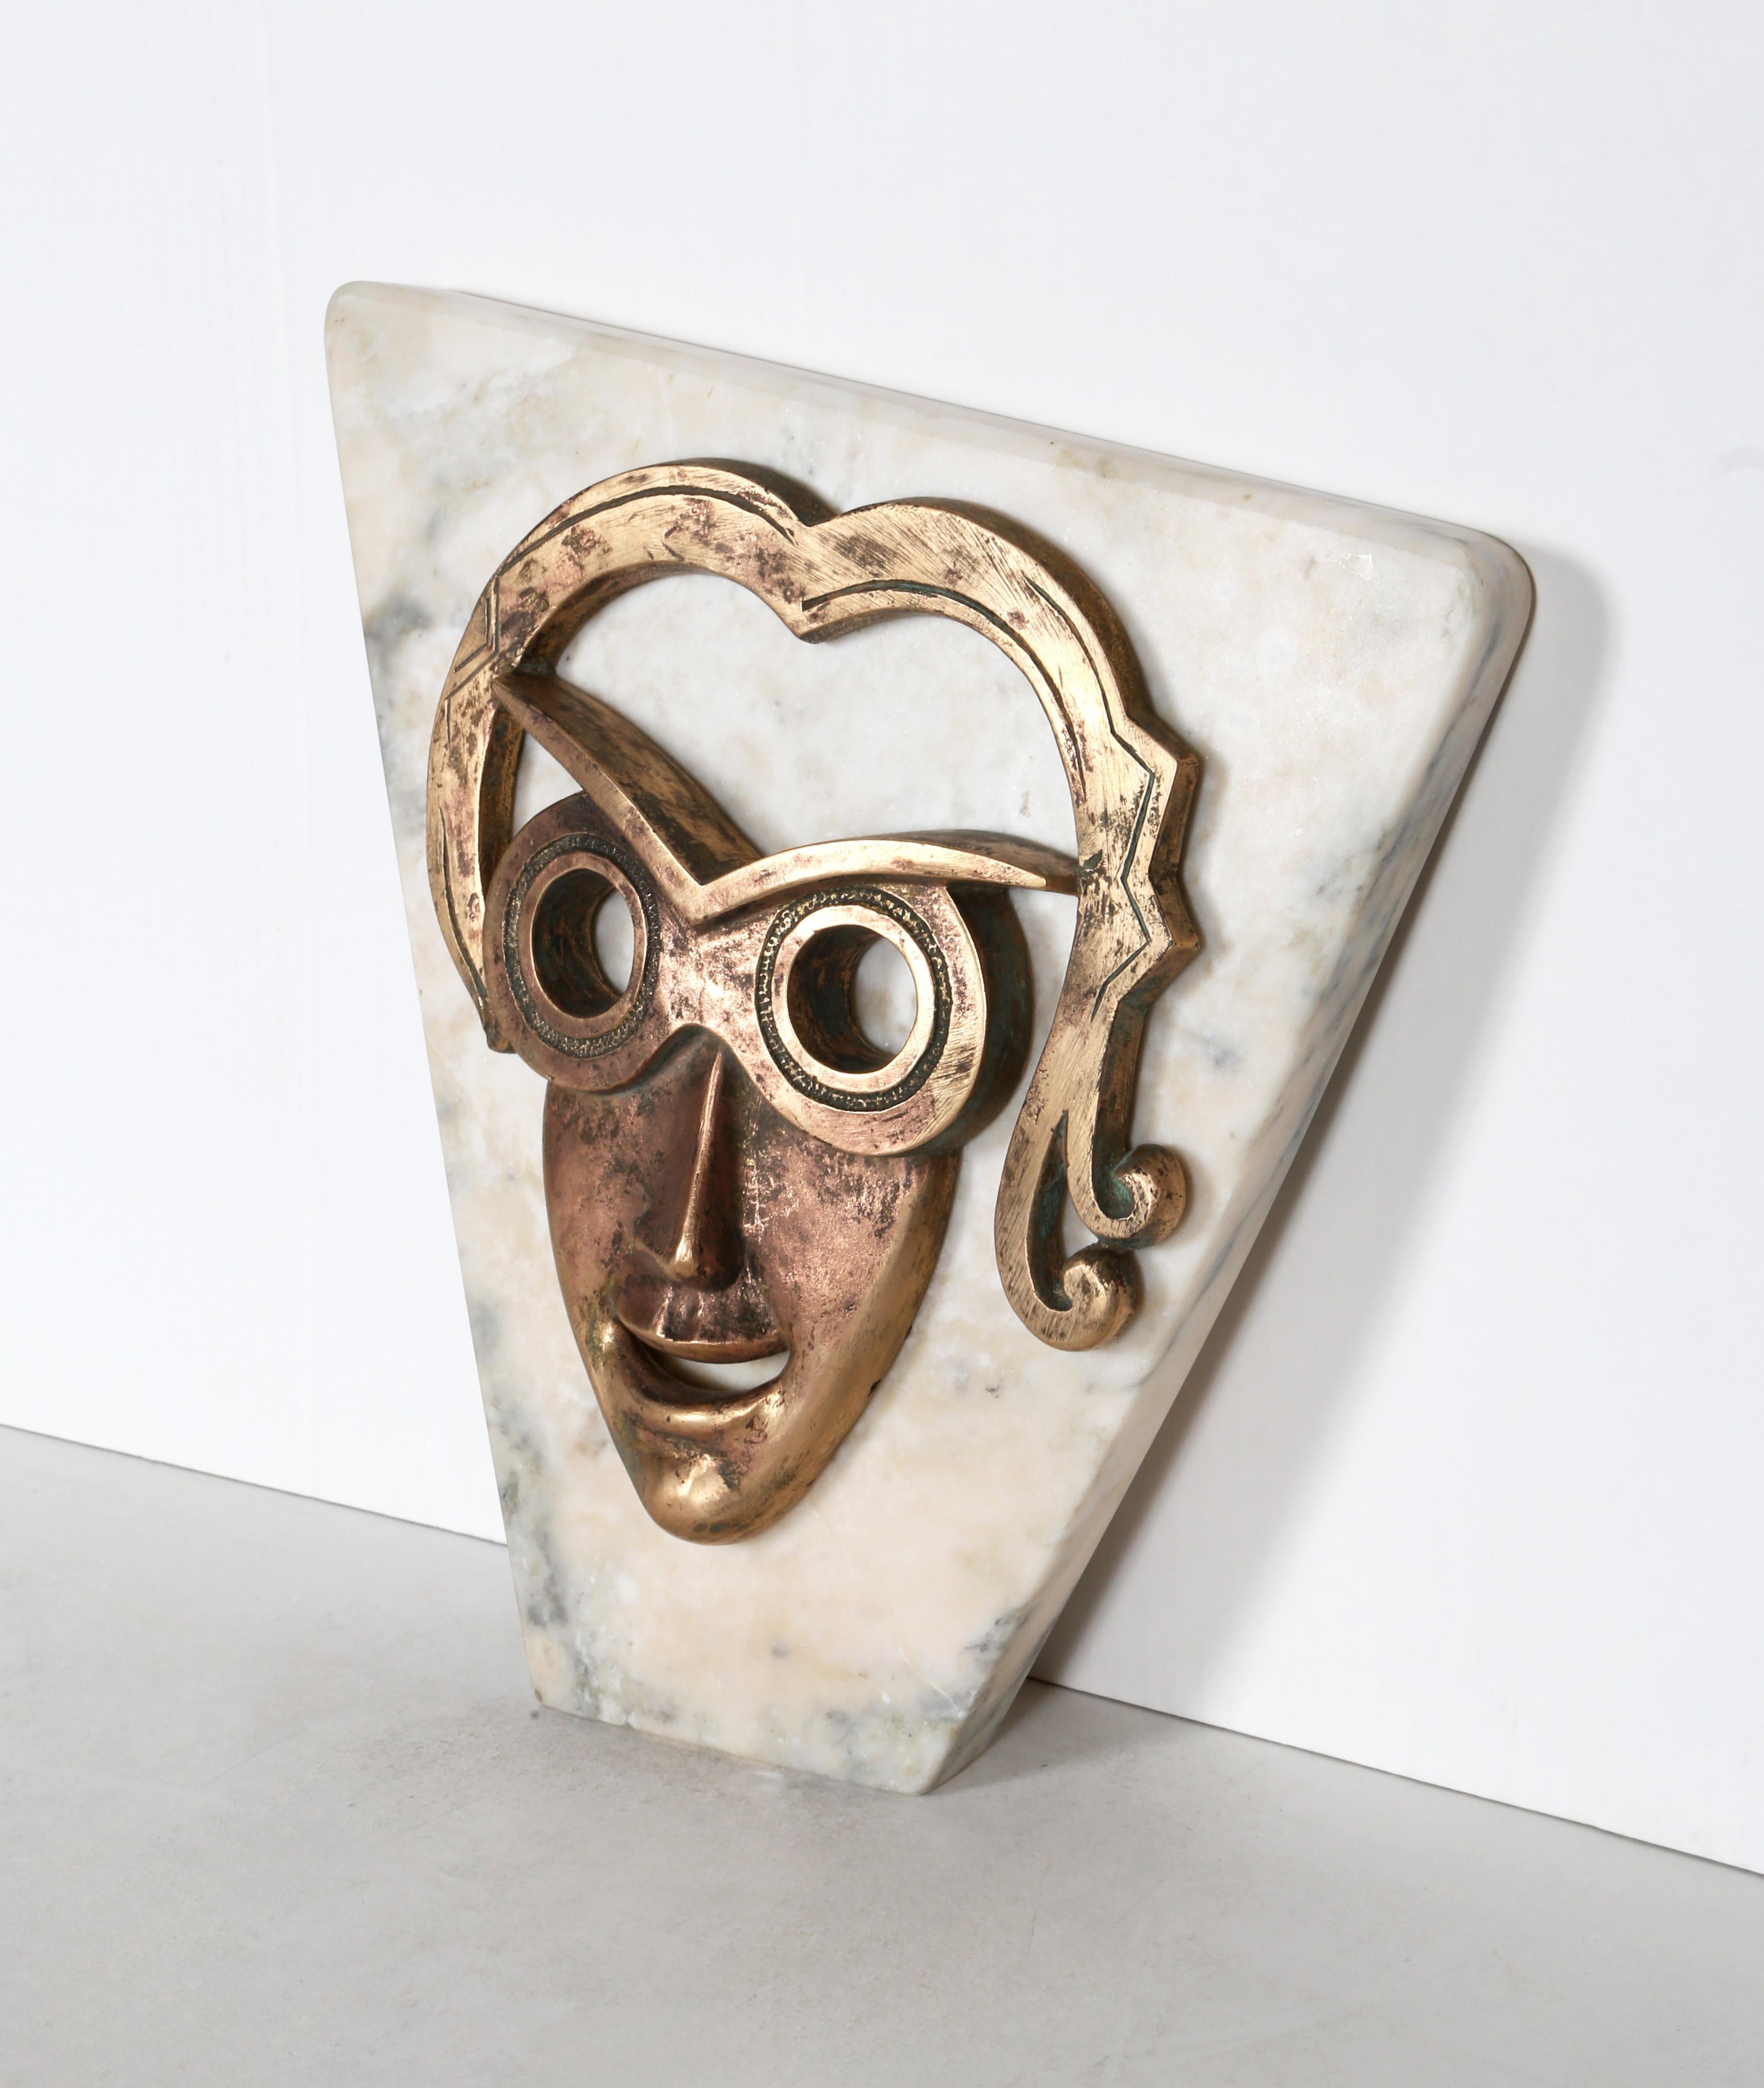 This Bronze portrait by Constantin Antonovici is laid directly into the surface of a cut slab of white marble. Intense and hollow eyes stare out from a smiling visage, creating an unnerving image of a woman trapped in stone.

Ileana
Constantin